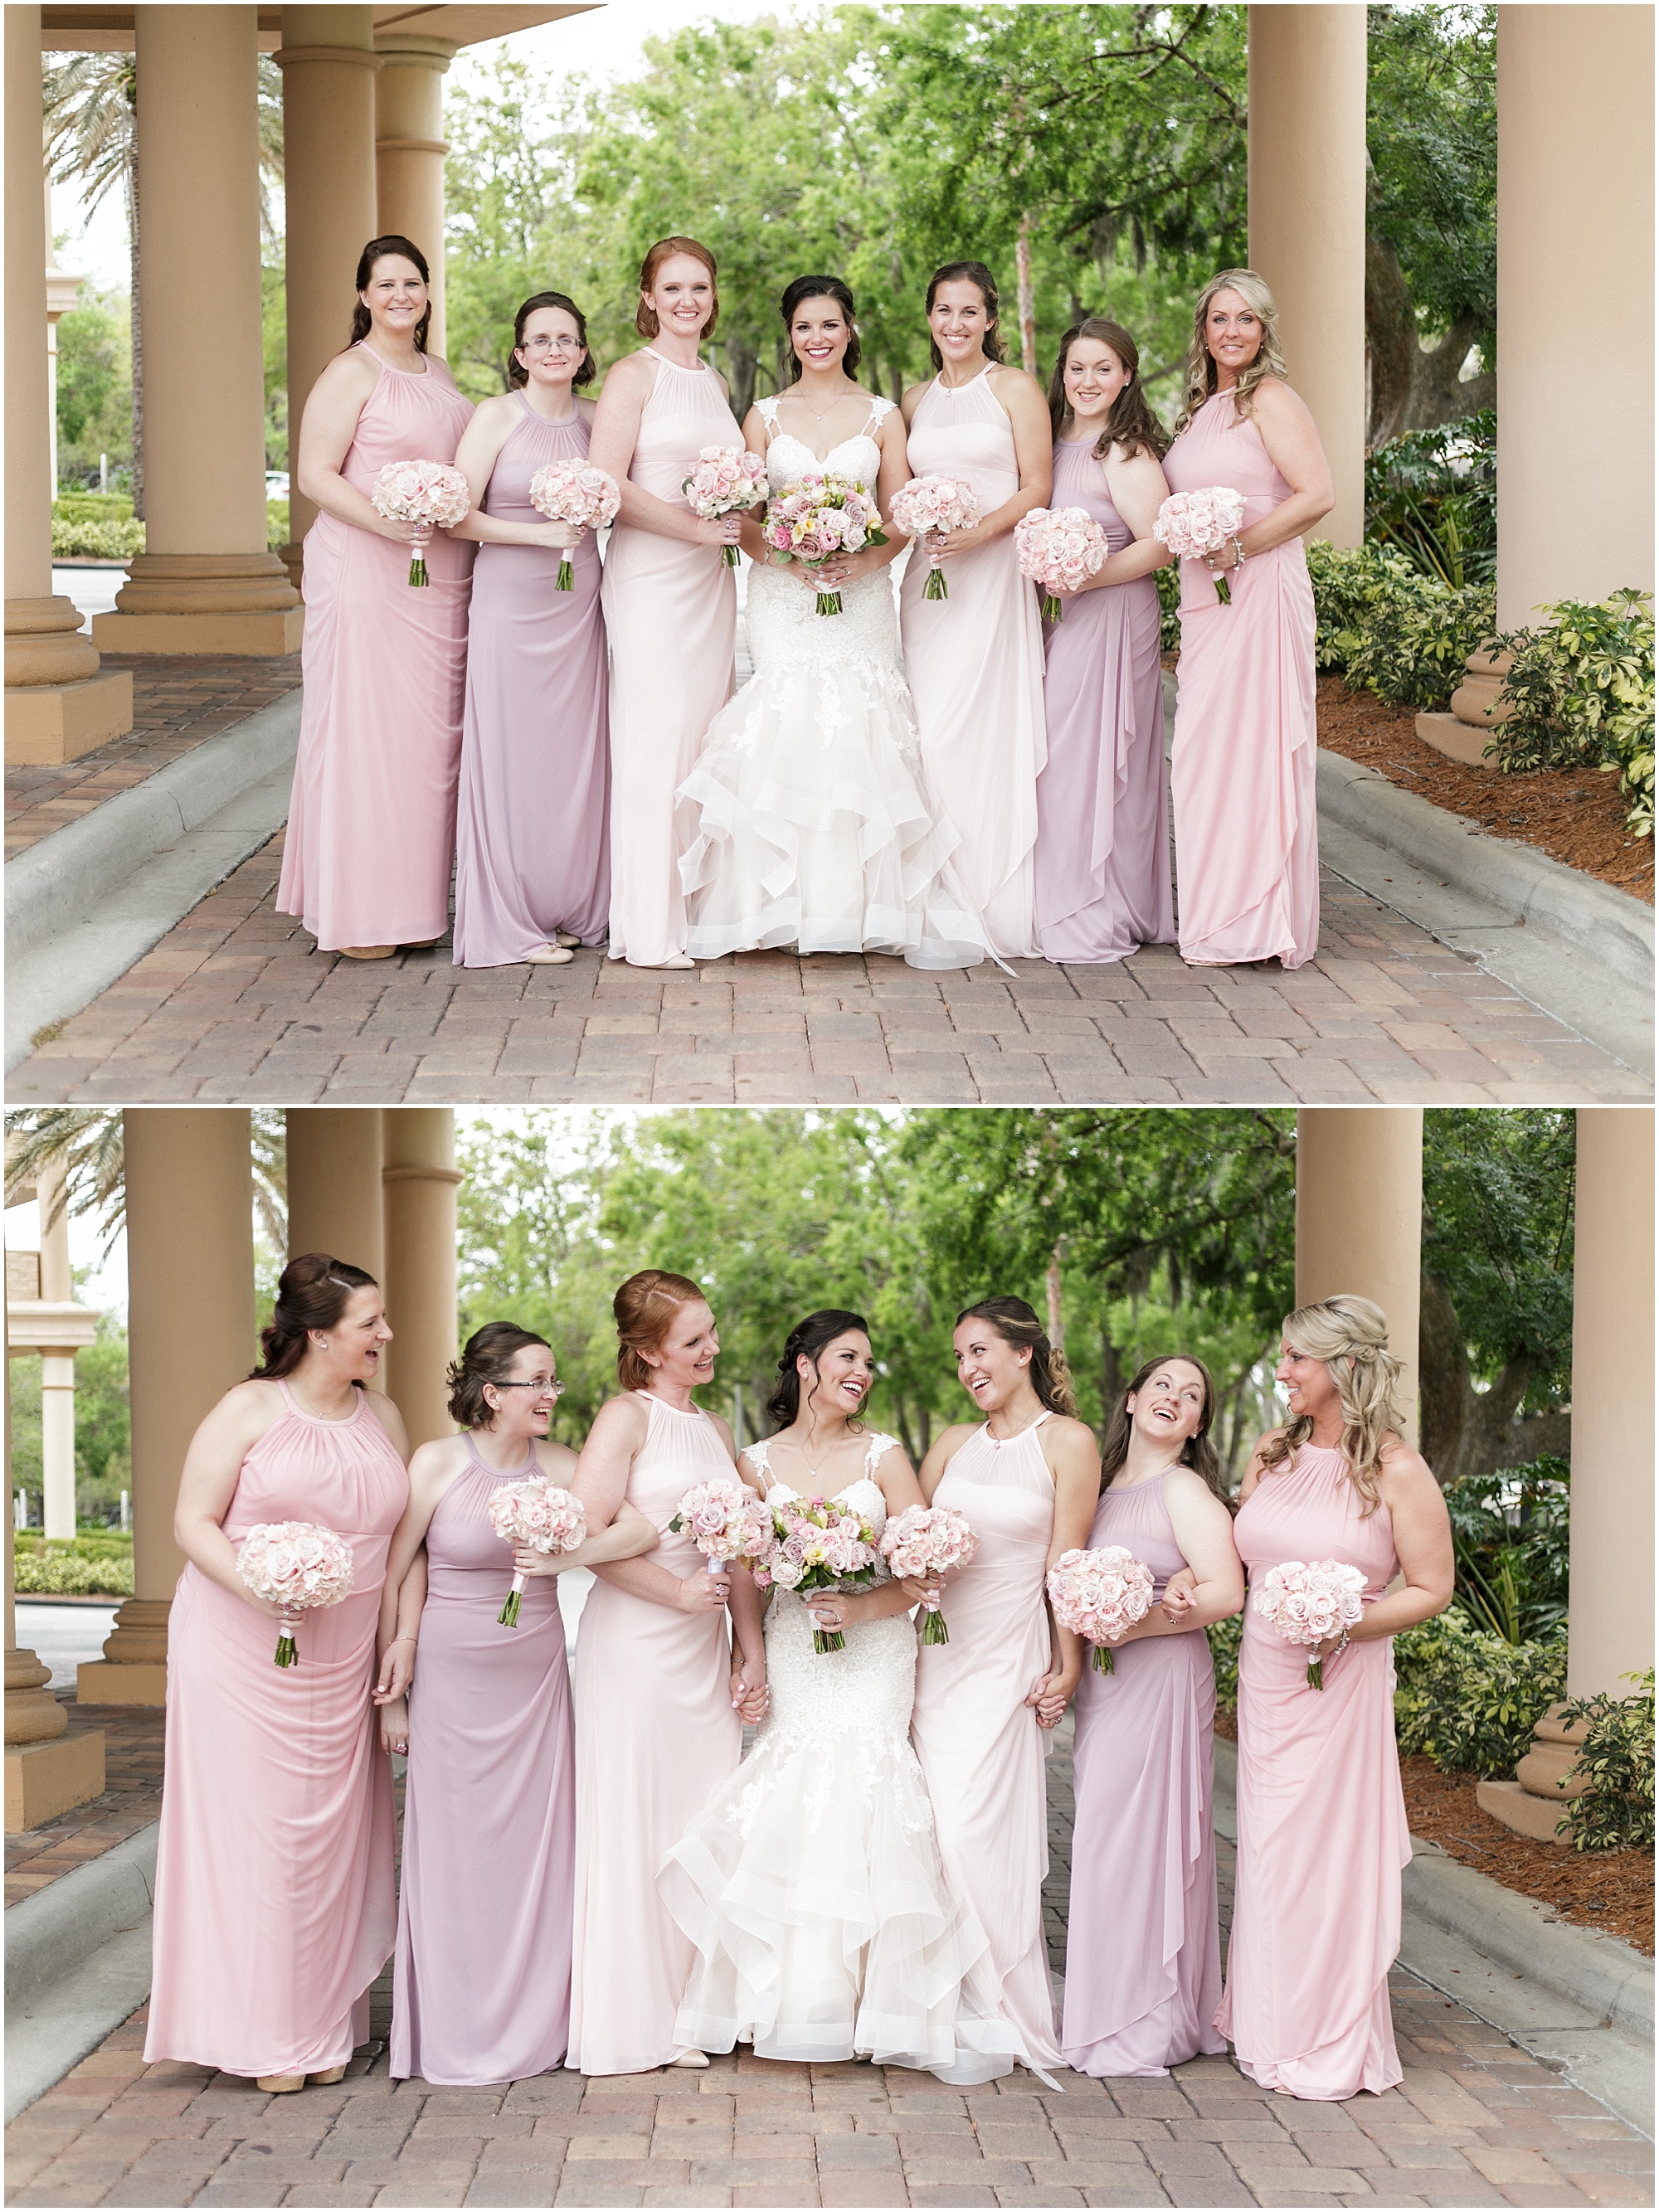 The bride and her bridesmaids taking photos outside. 